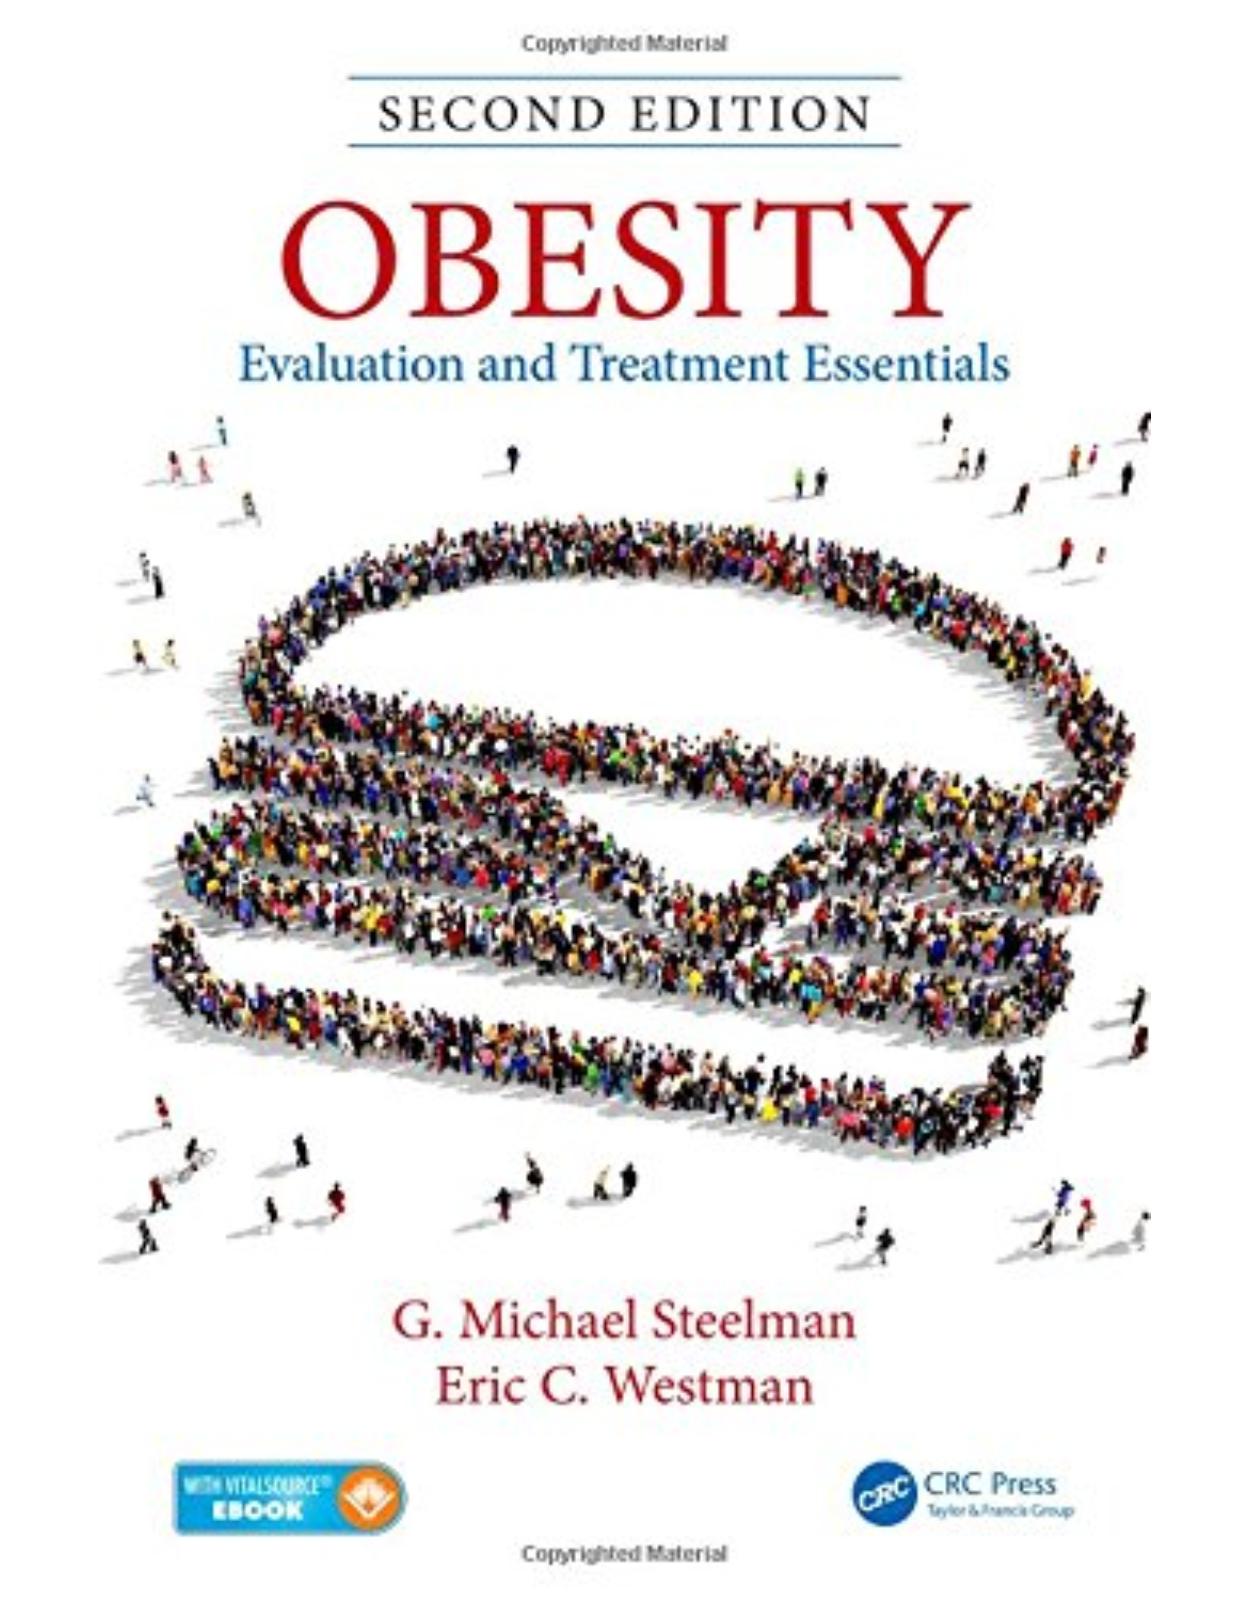 Obesity: Evaluation and Treatment Essentials, Second Edition